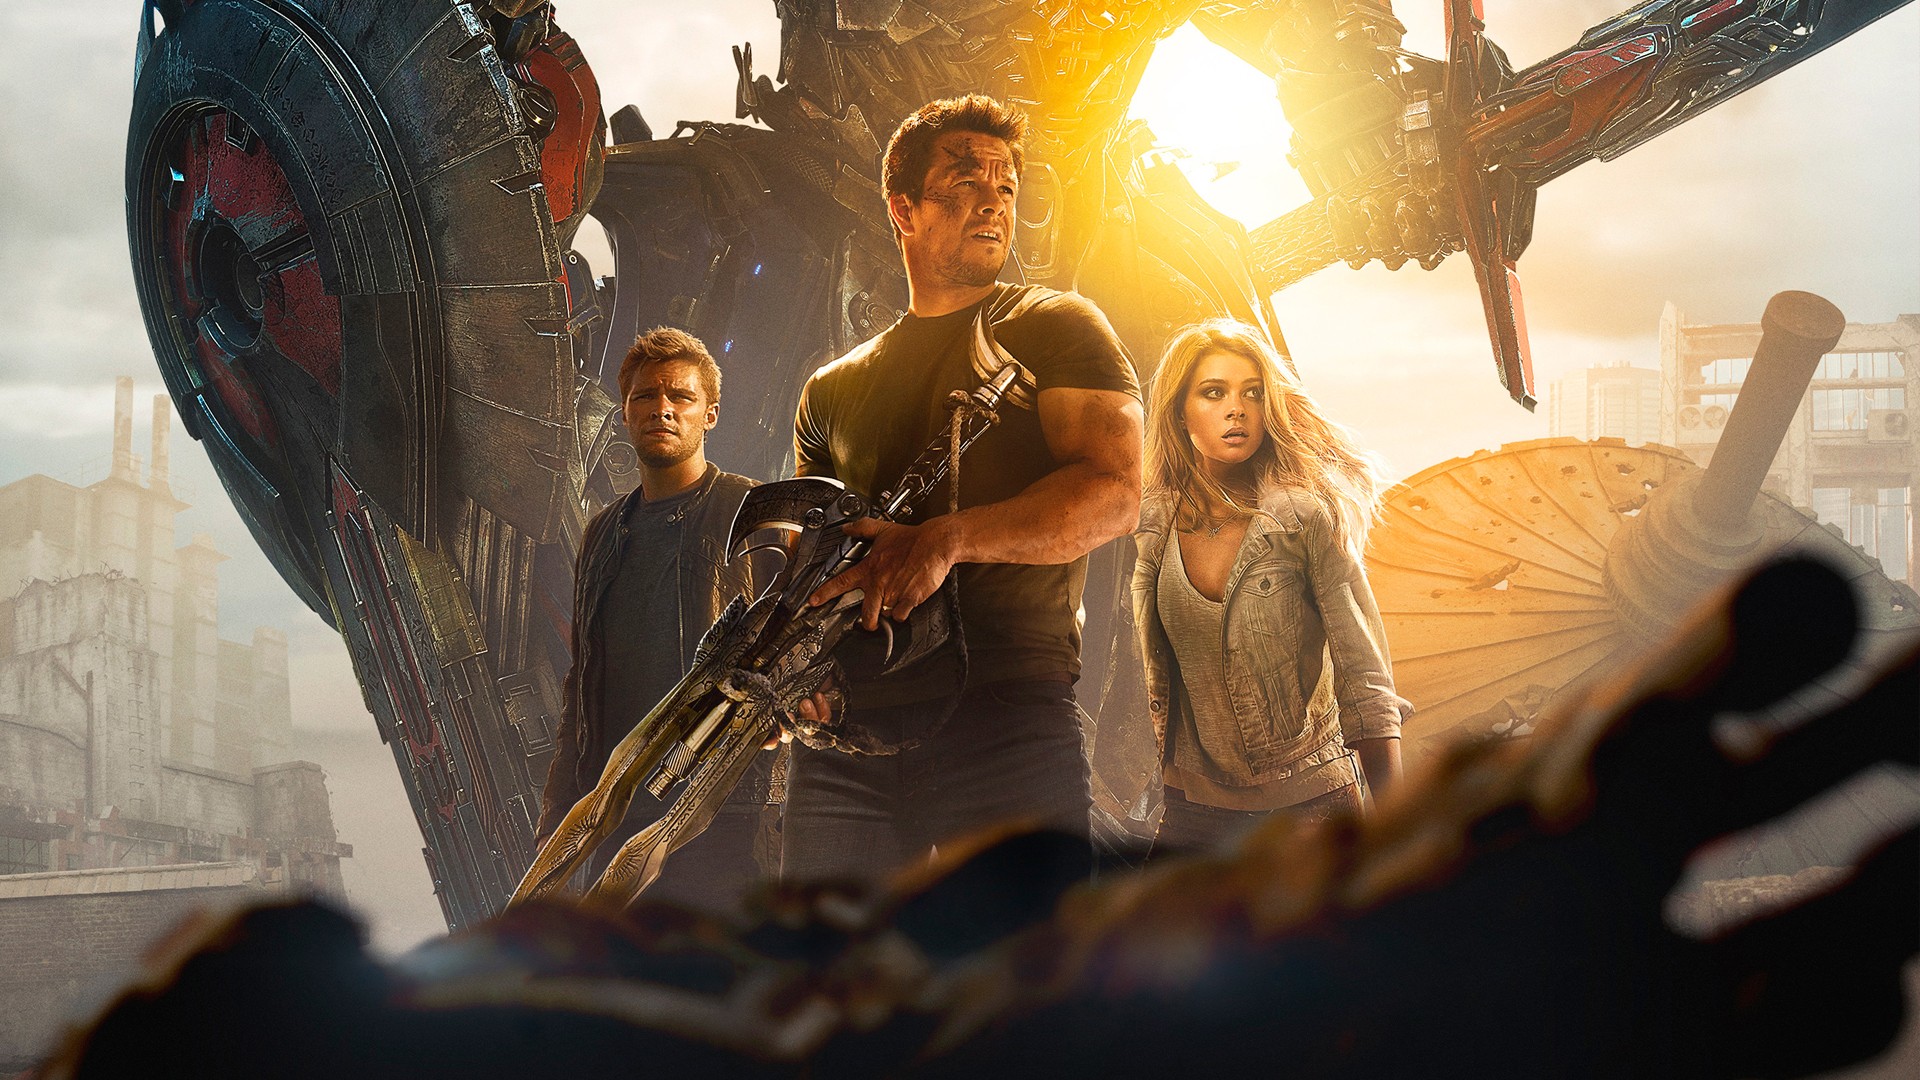 Transformers Transformers Age Of Extinction Mark Wahlberg Cade Yeager Nicola Peltz Tessa Yeager Jack 1920x1080